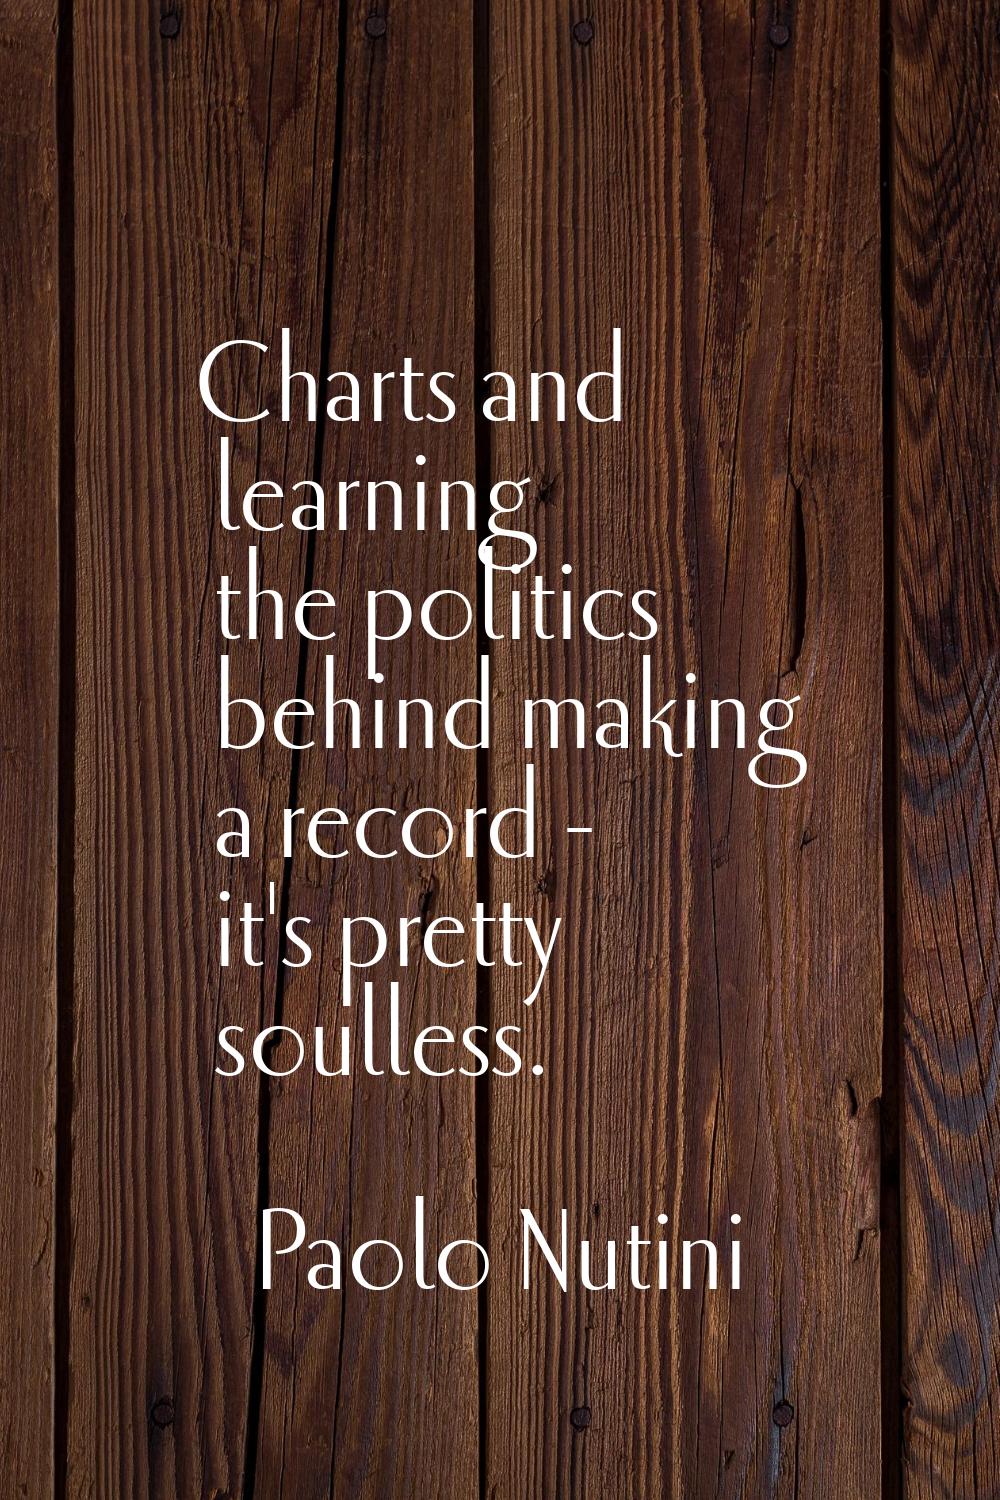 Charts and learning the politics behind making a record - it's pretty soulless.